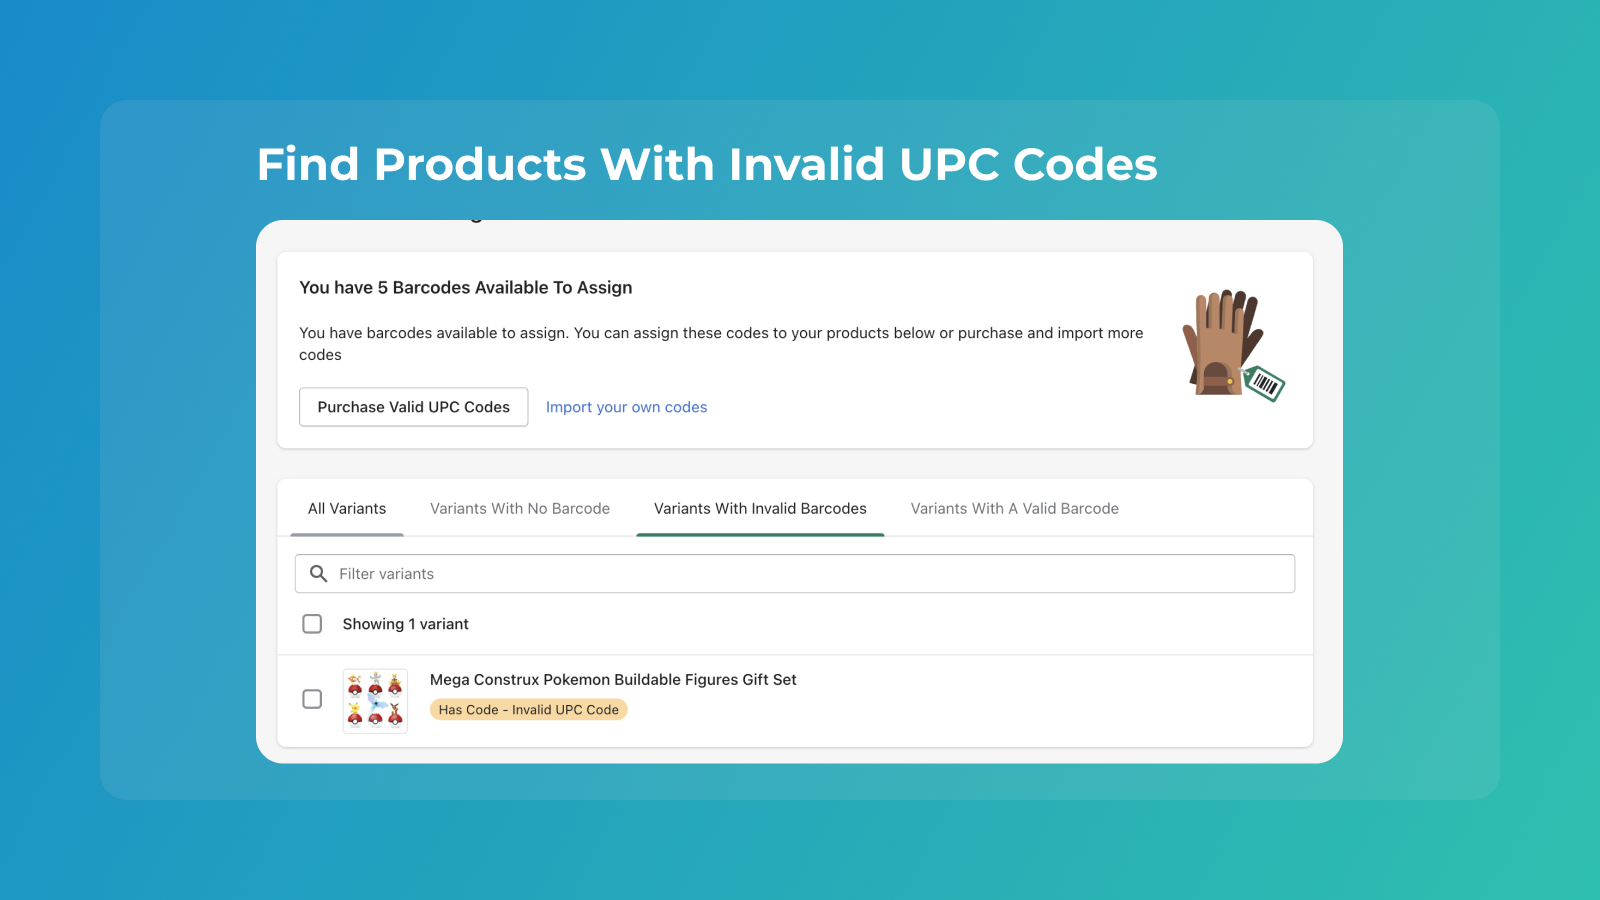 Find Products With Invalid UPC Codes